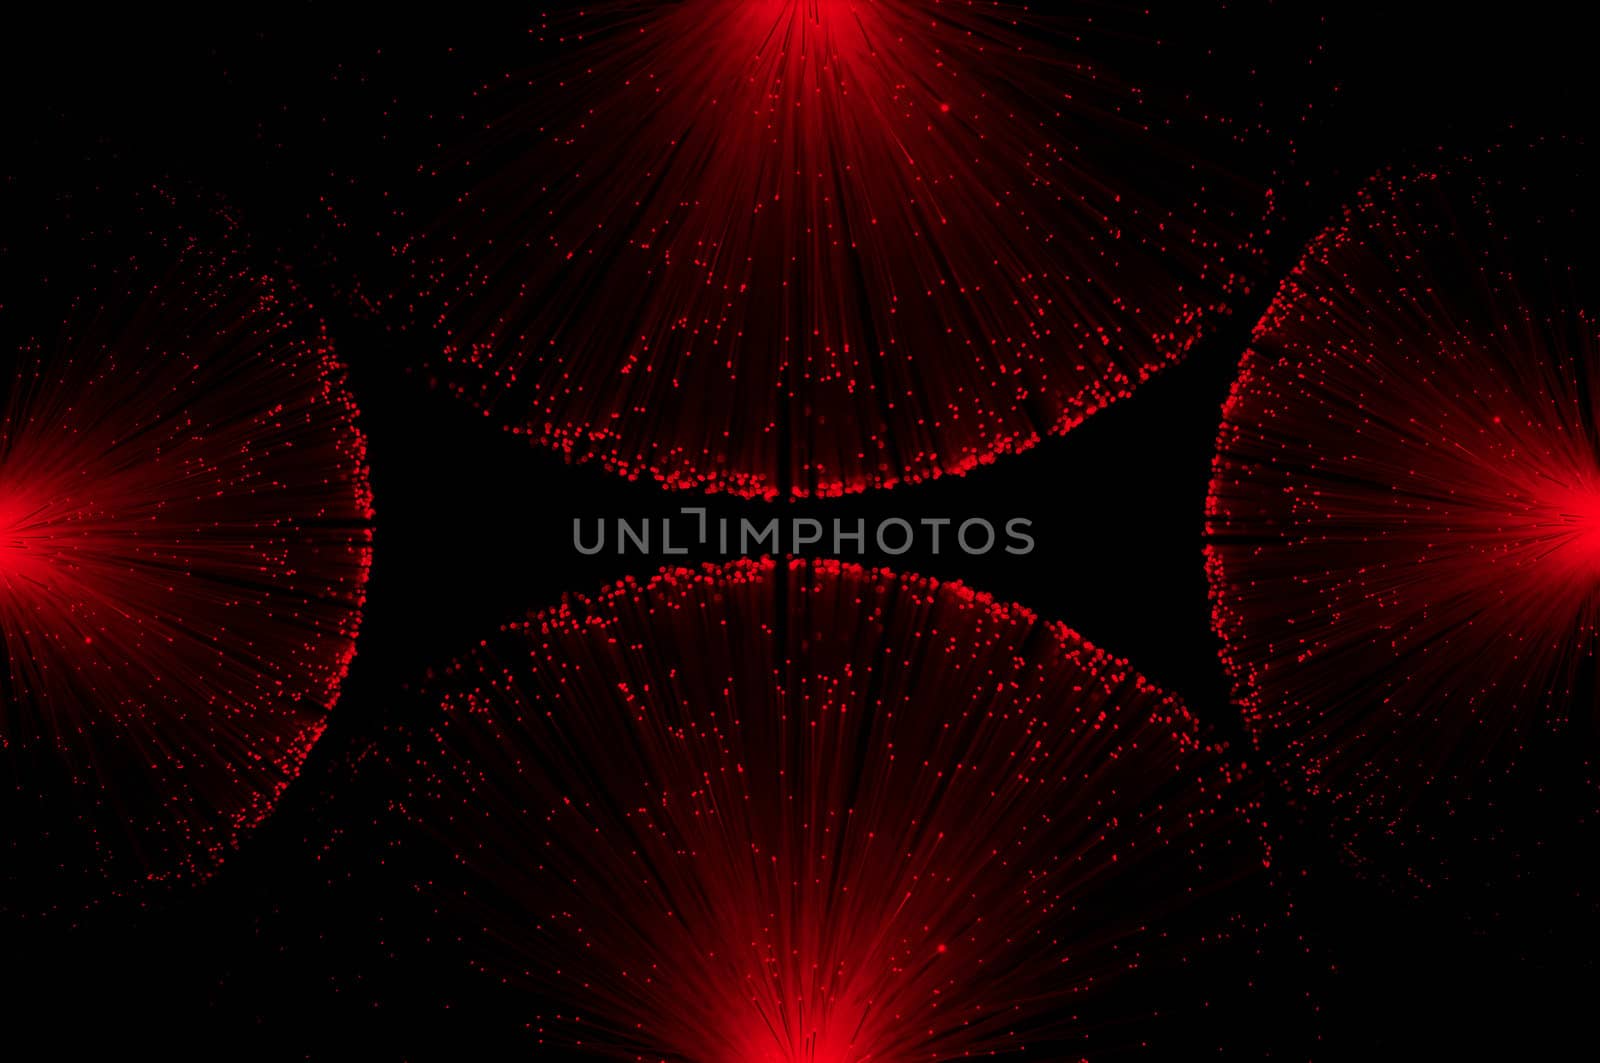 Four groups of illuminated red fibre optic light strands eminating from each edge of the image against a black background.